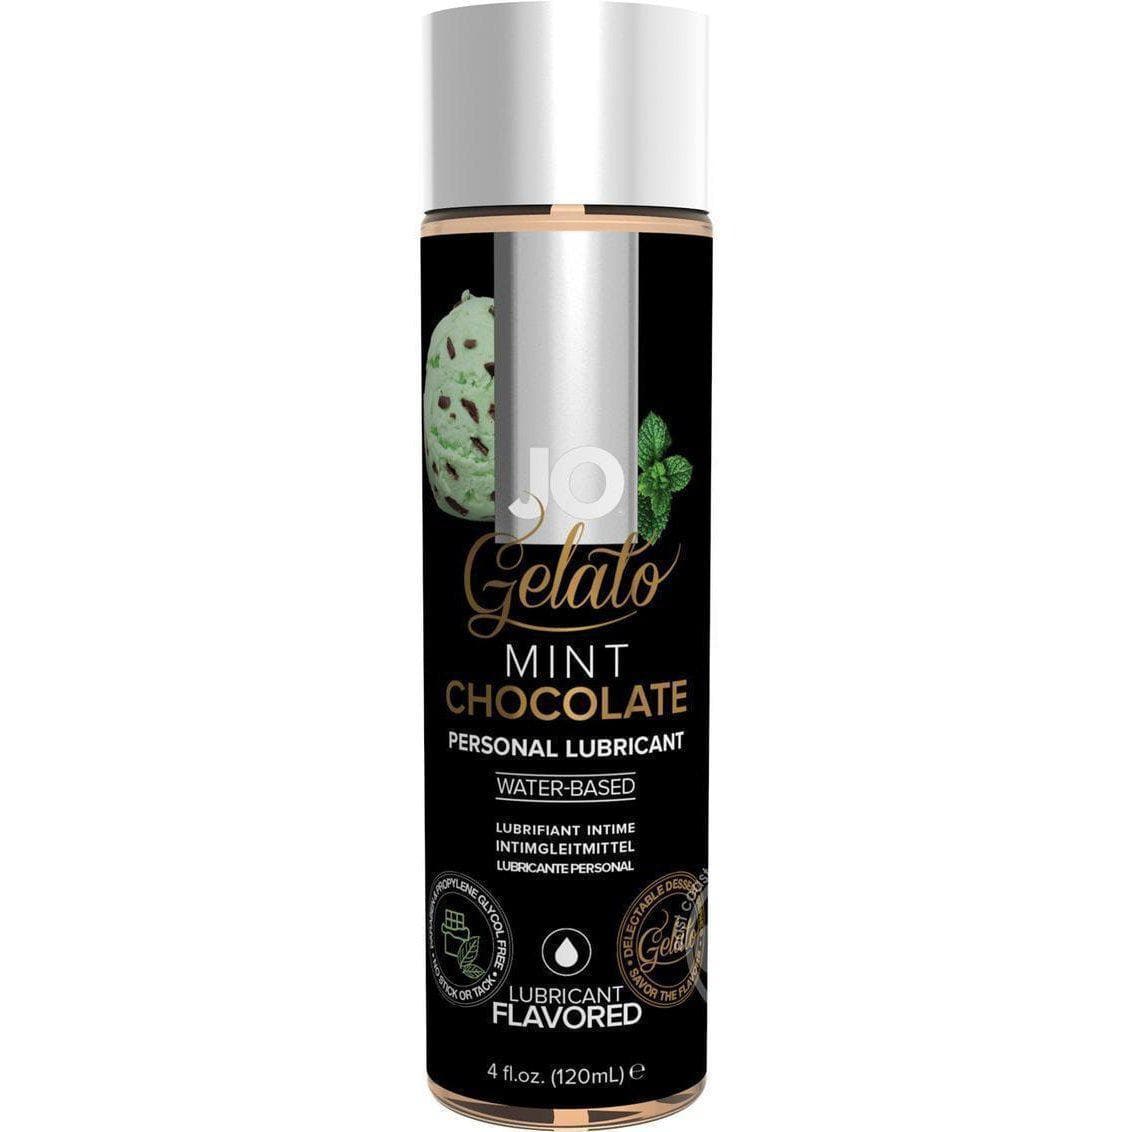 JO Gelato Water Based Personal Flavored Lubricant Mint Chocolate - Romantic Blessings